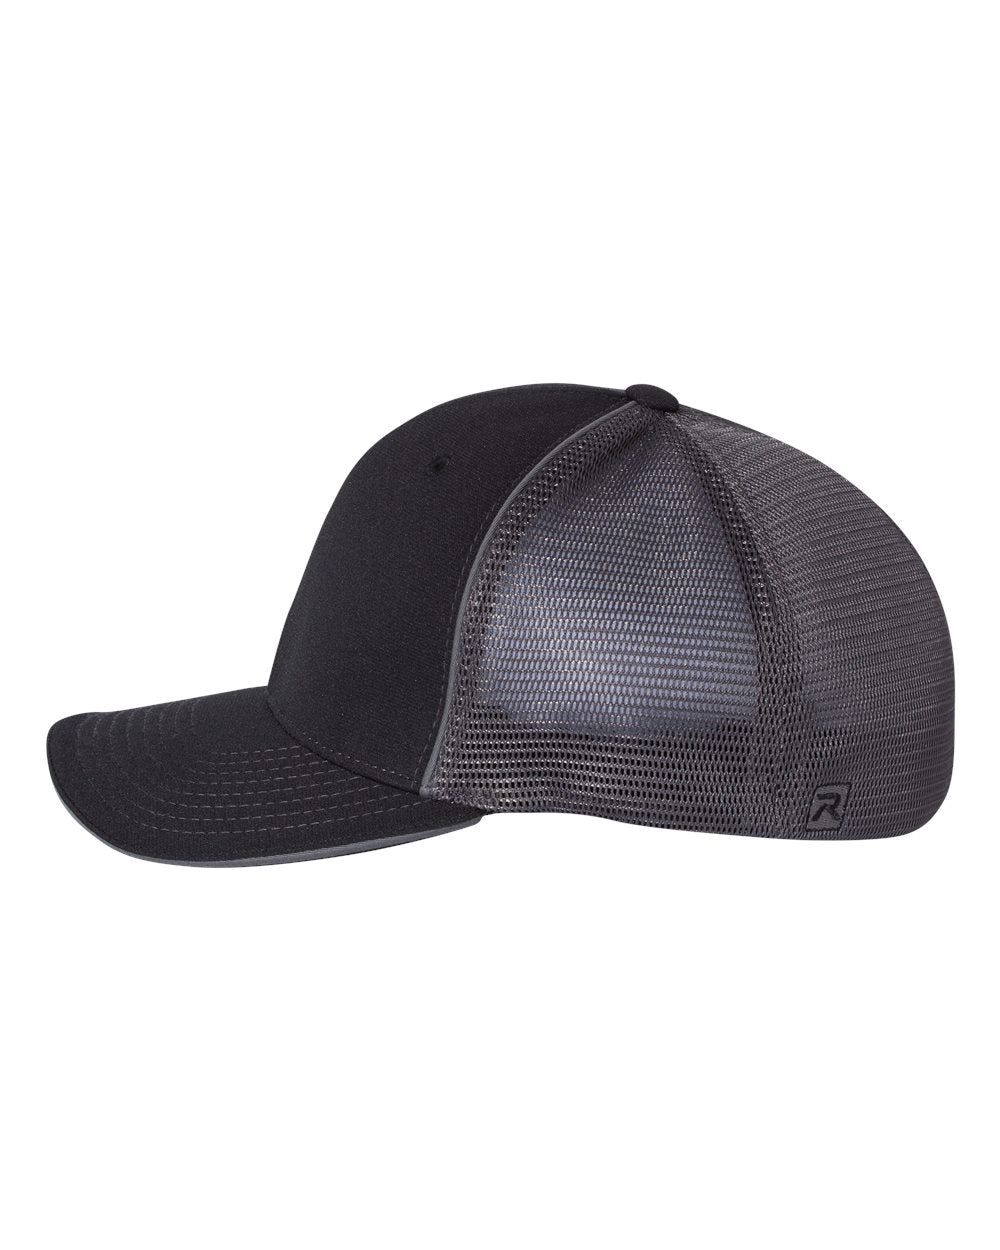 Baseball Hat Richardson Sports mesh R-Flex with Engraved Leatherette Patch Pressed